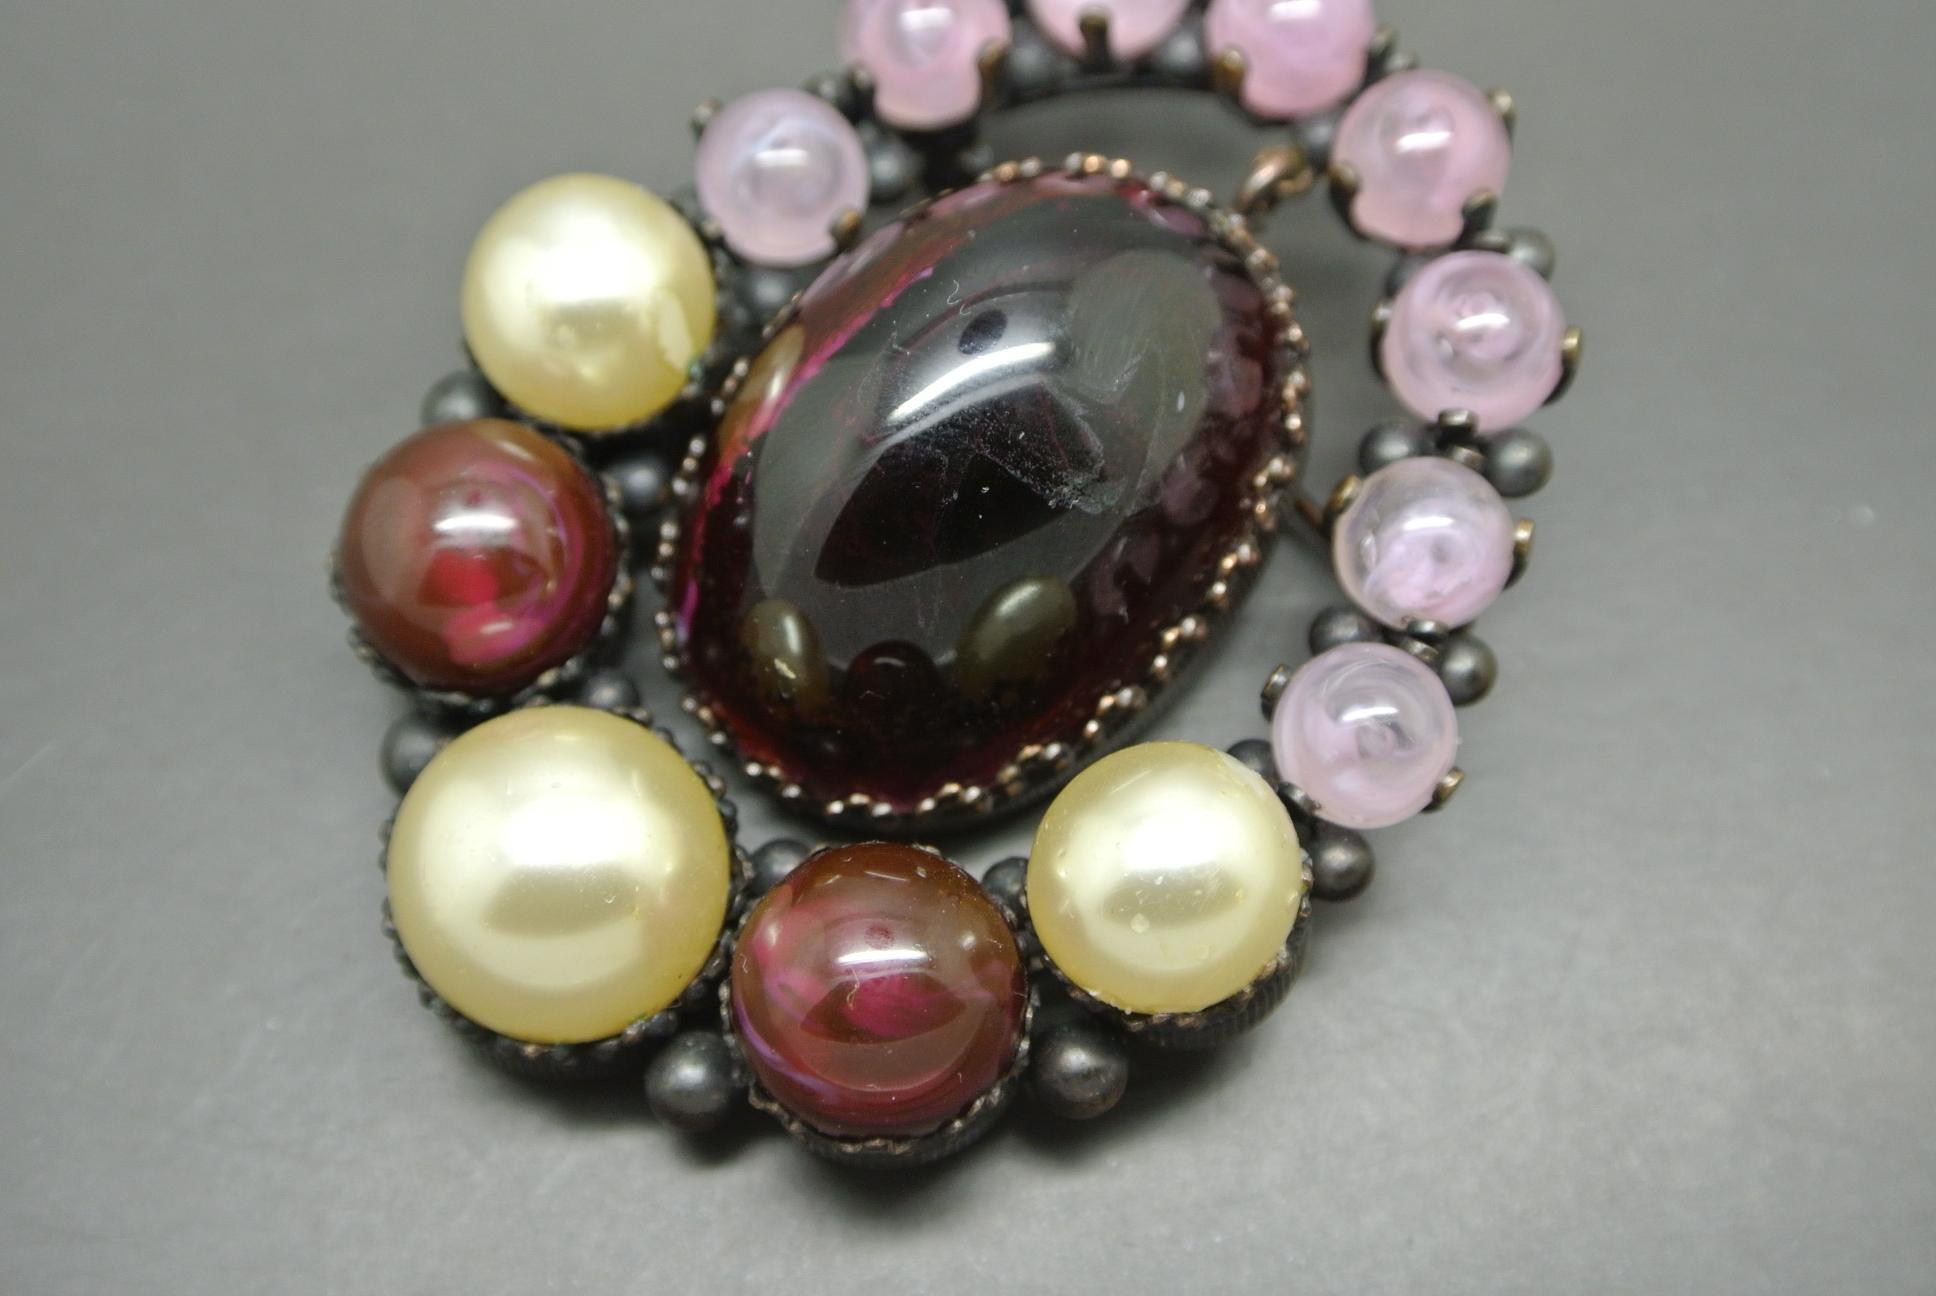 Christian Dior Brooch
Signed and dated 1960
Made by Henkel&Grosse Company